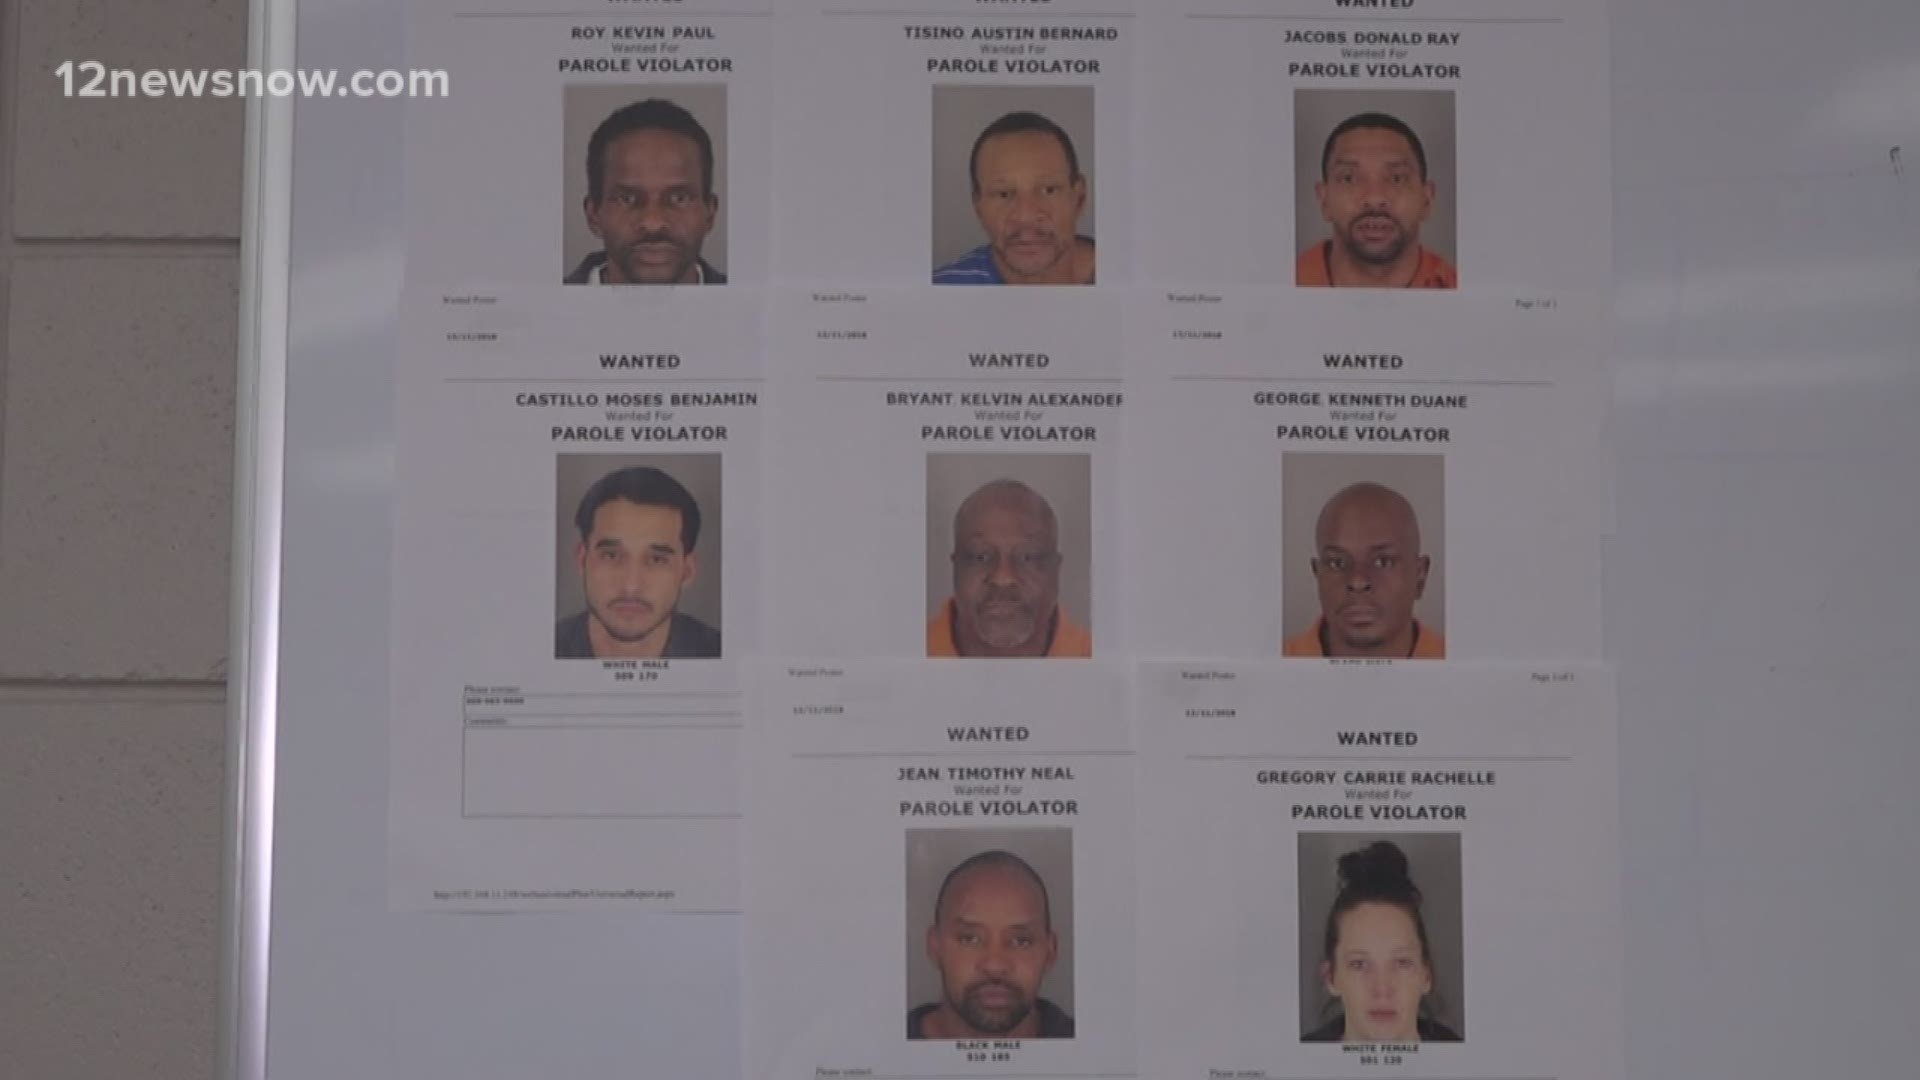 Port Arthur Police joined forces with the U.S. Marshals and Jefferson County Sheriff's Office in search of 22 people facing parole violations.